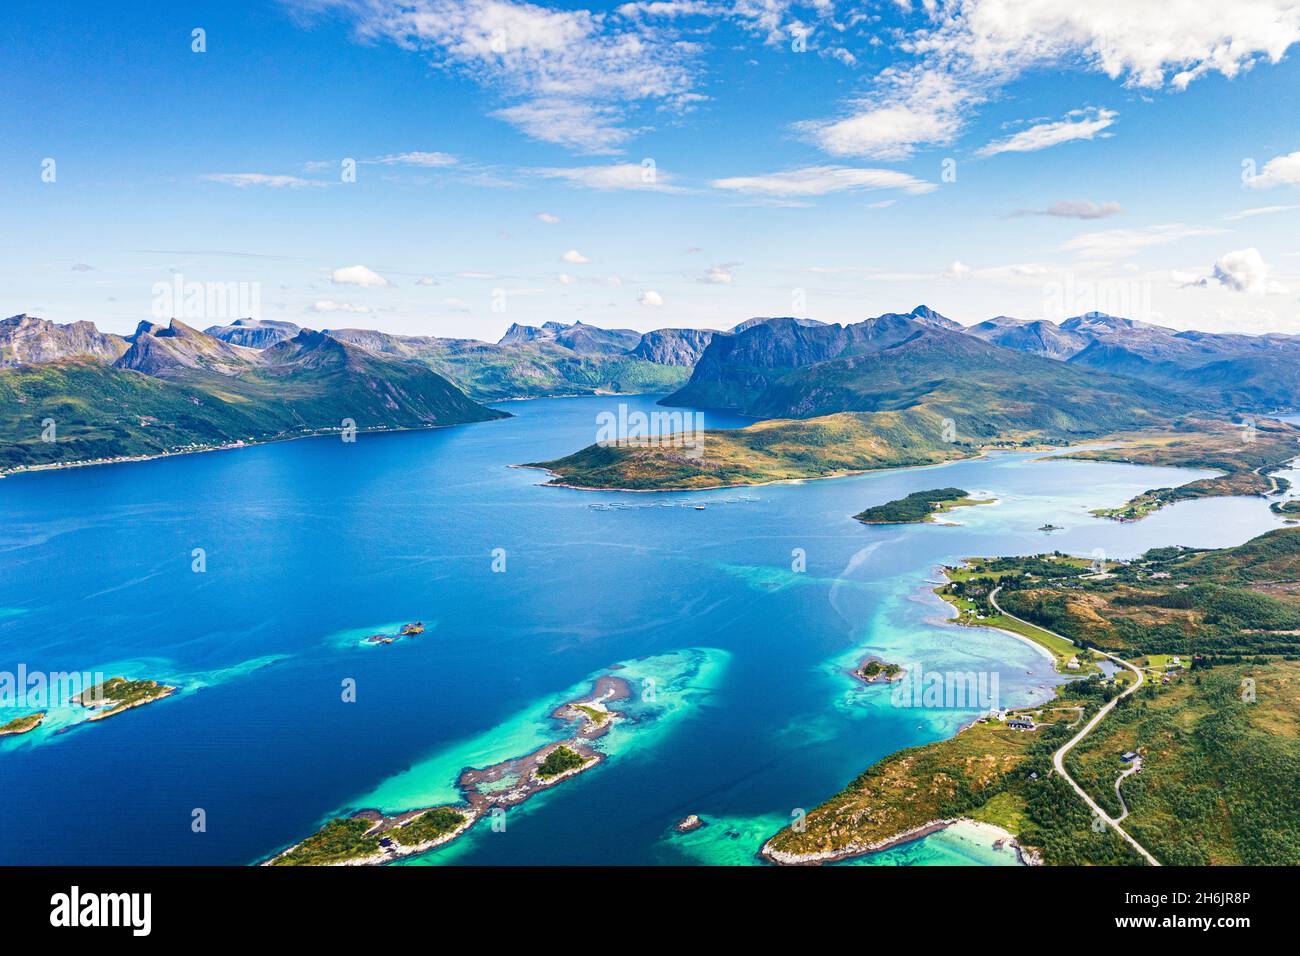 Aerial view of Bergsoyan Islands and Bergsbotn scenic route along the fjord, Skaland, Senja, Troms county, Norway, Scandinavia, Europe Stock Photo